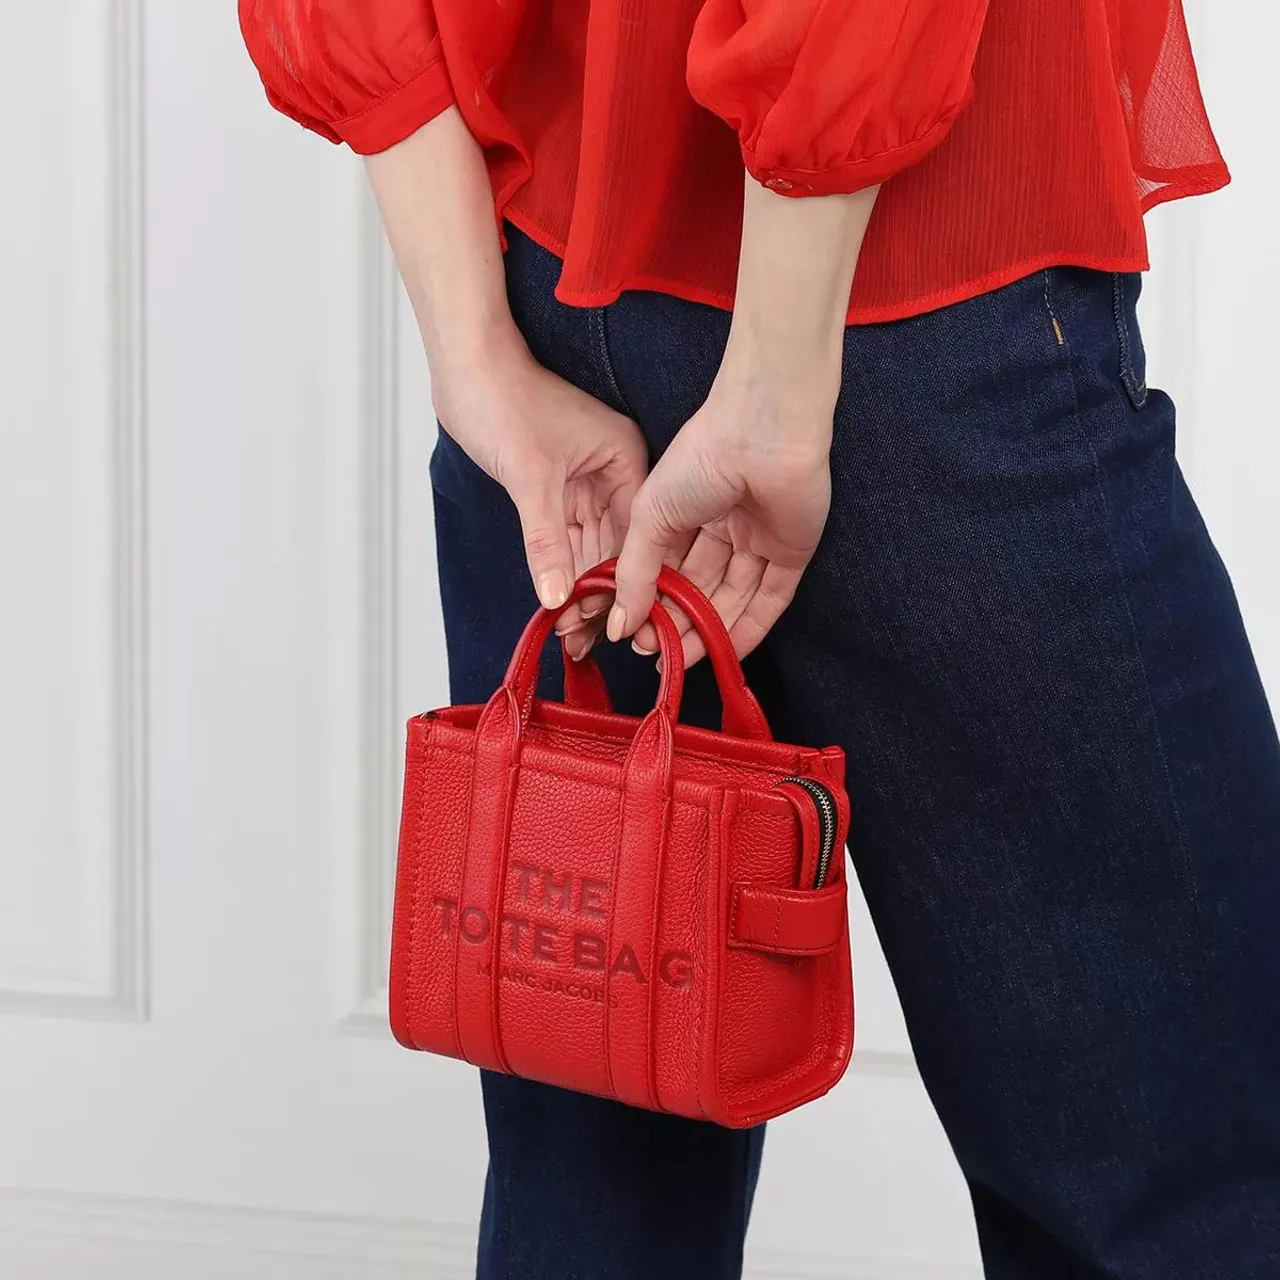 Marc Jacobs Tote Bags - The Micro Tote - red - Tote Bags for ladies